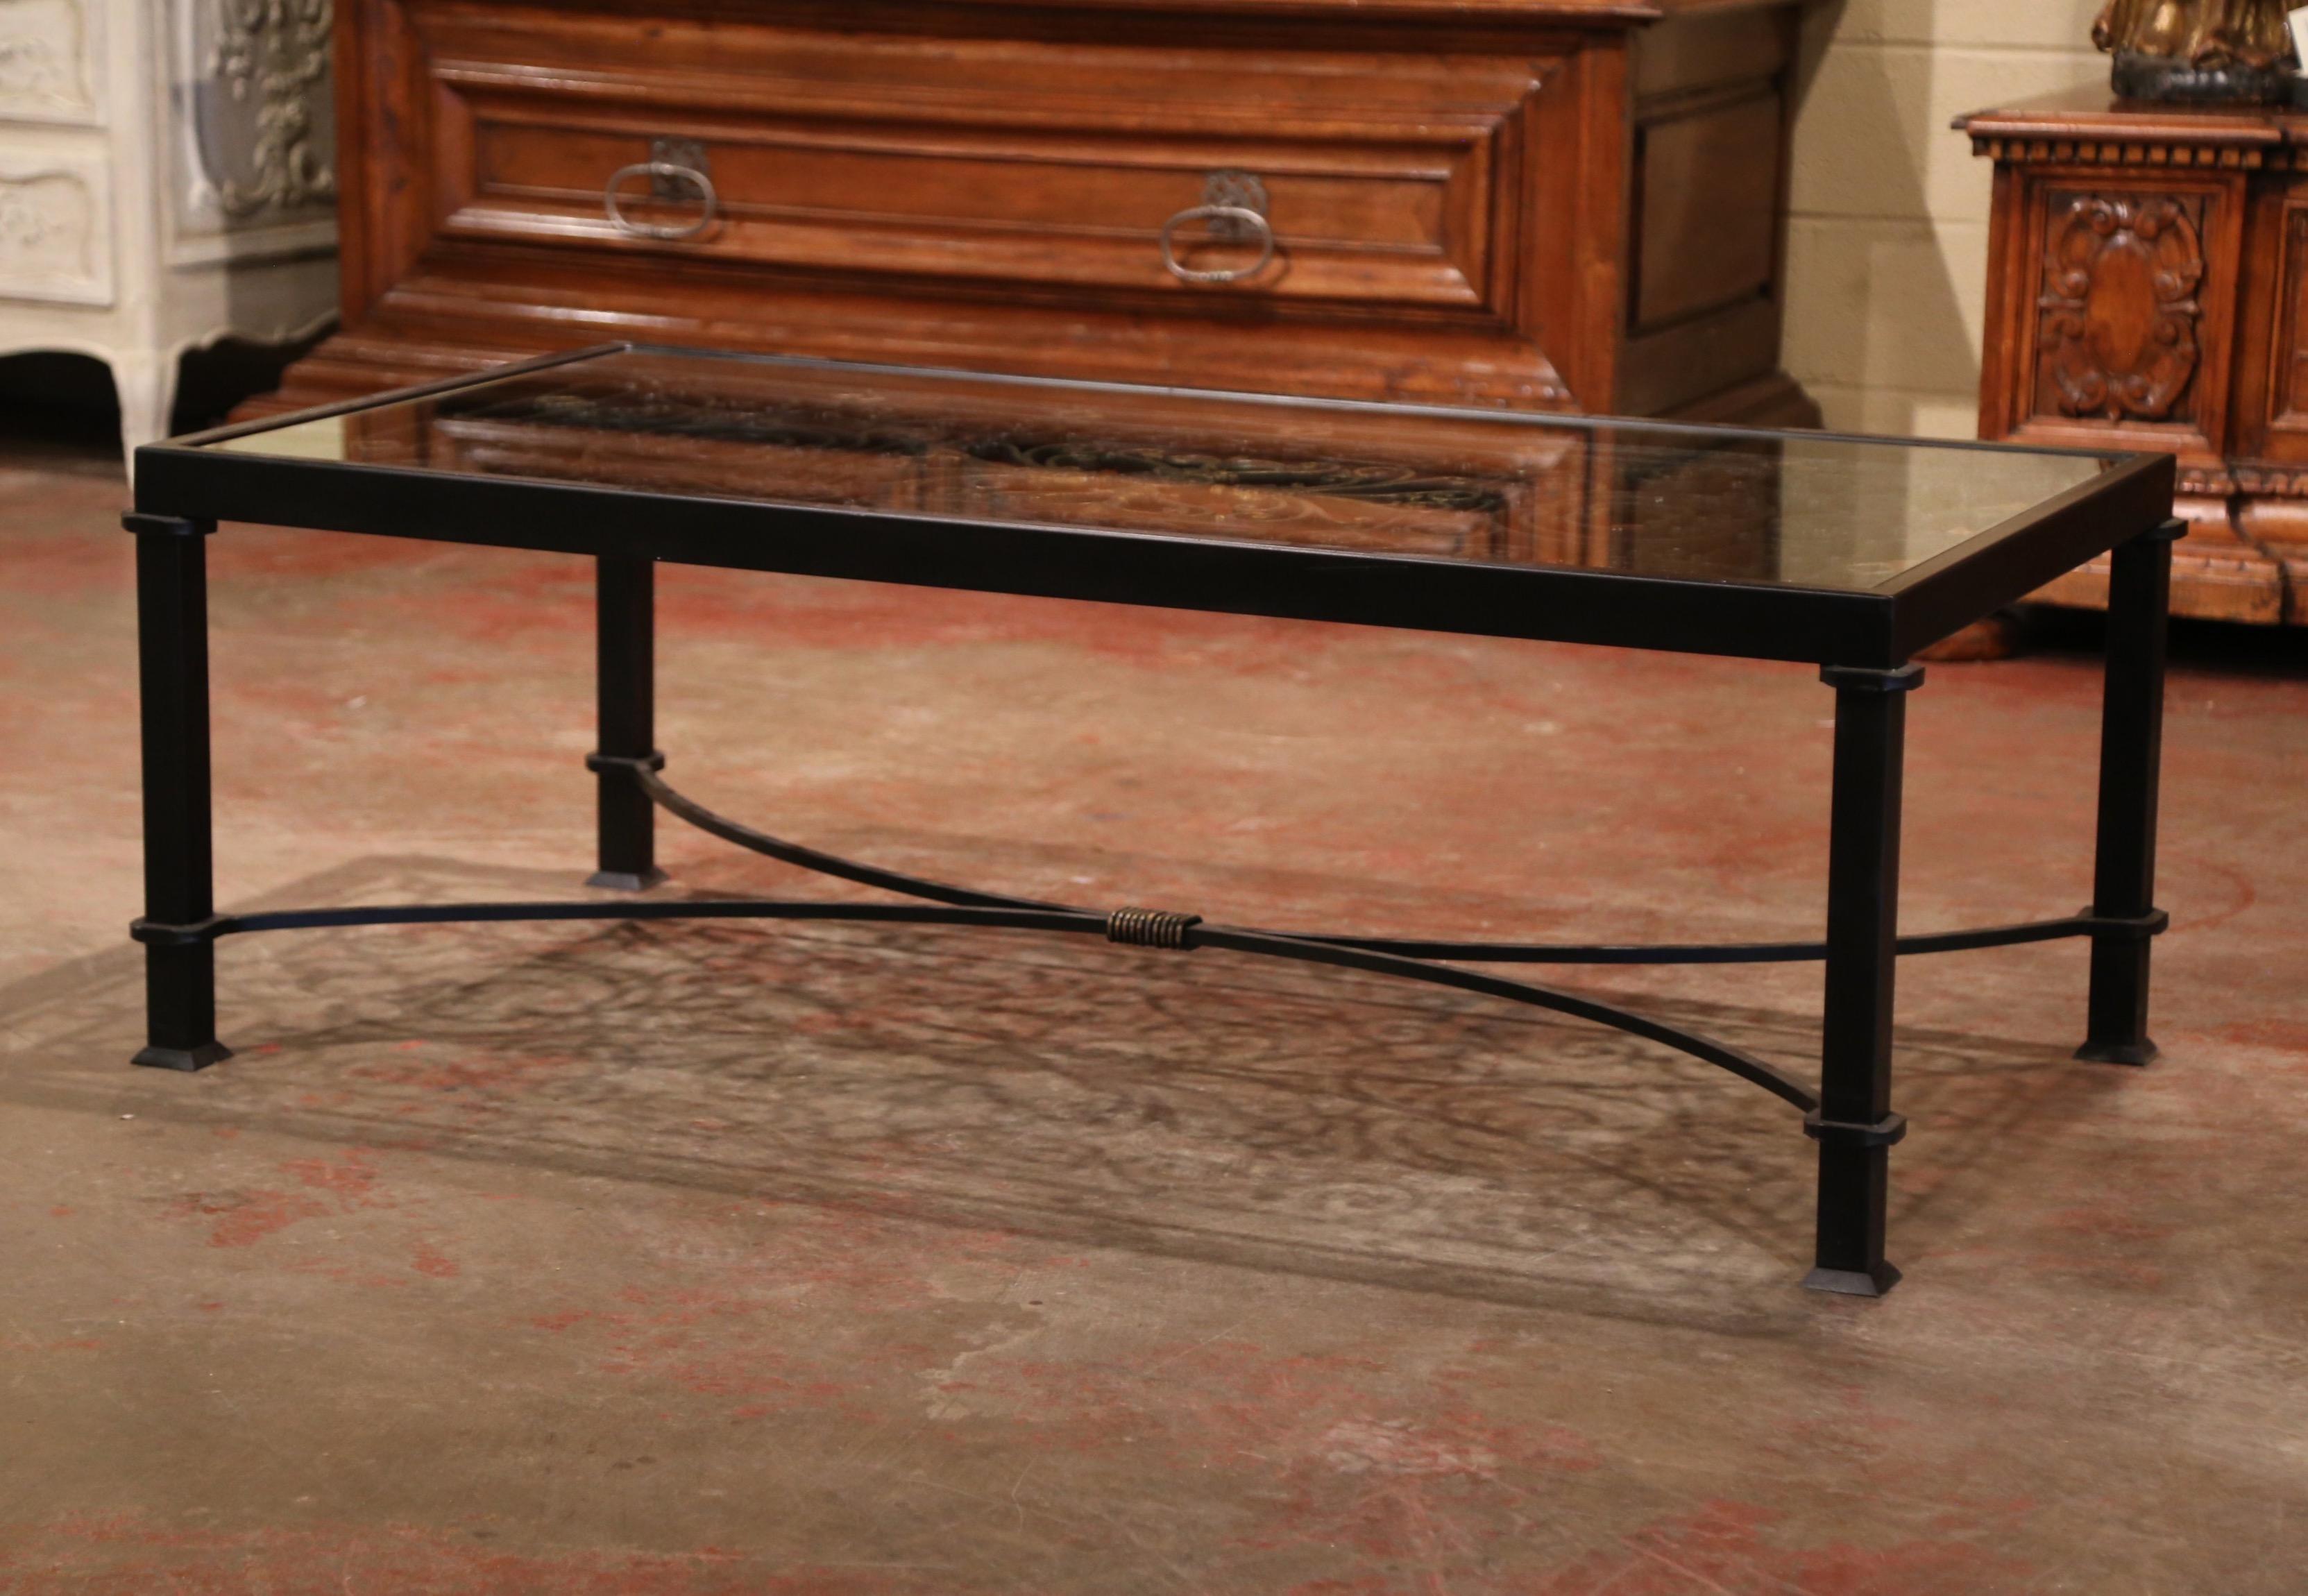 Decorate a den or a formal living room with this iron coffee table; built using an ornate, antique gate from France, circa 1850, the unique table features four square legs decorated with a bottom curved stretcher. The top has intricate scroll motifs